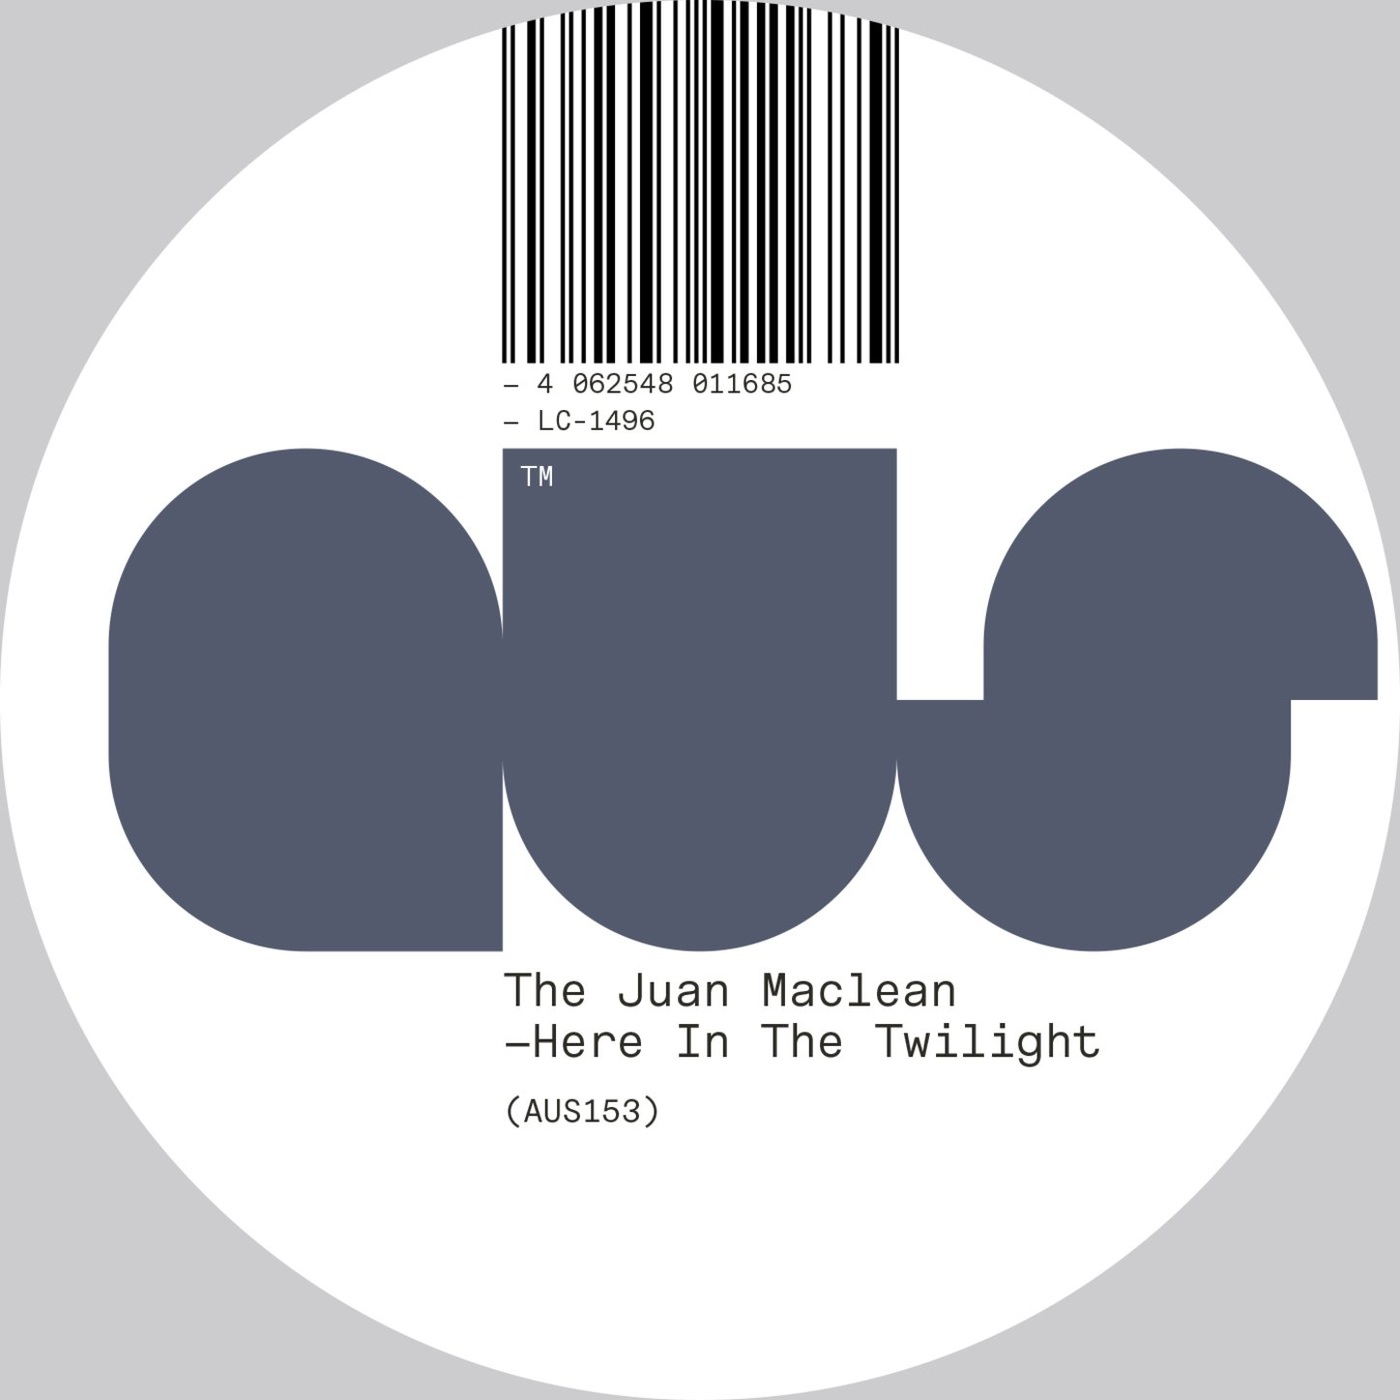 image cover: The Juan Maclean - Here in the Twilight /